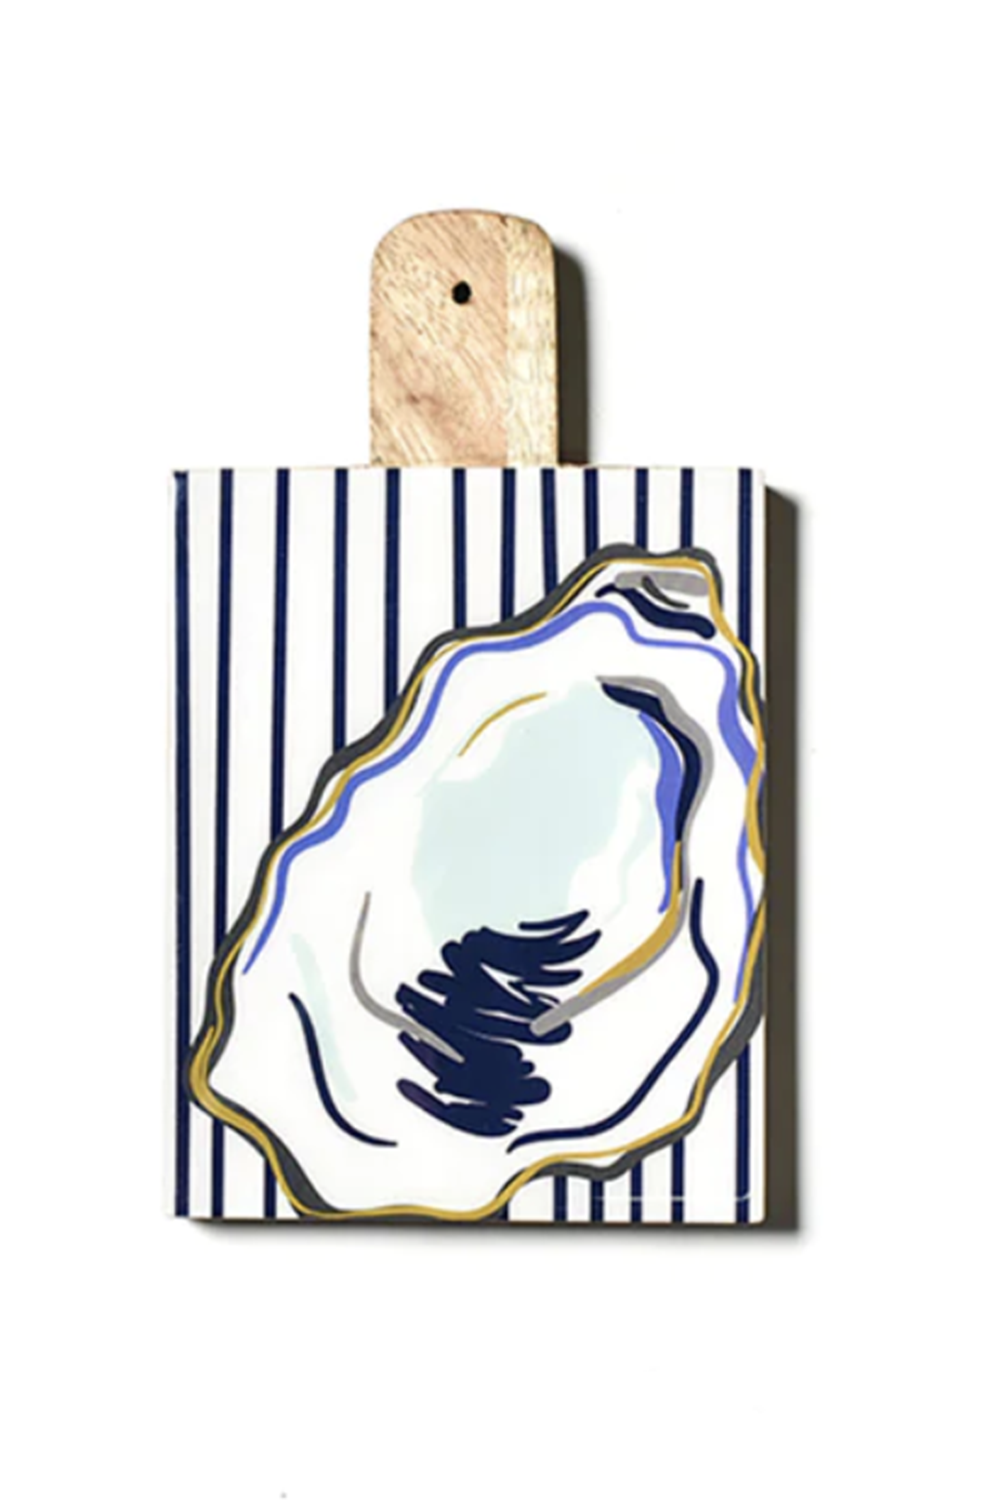 Oyster Small Wood Board